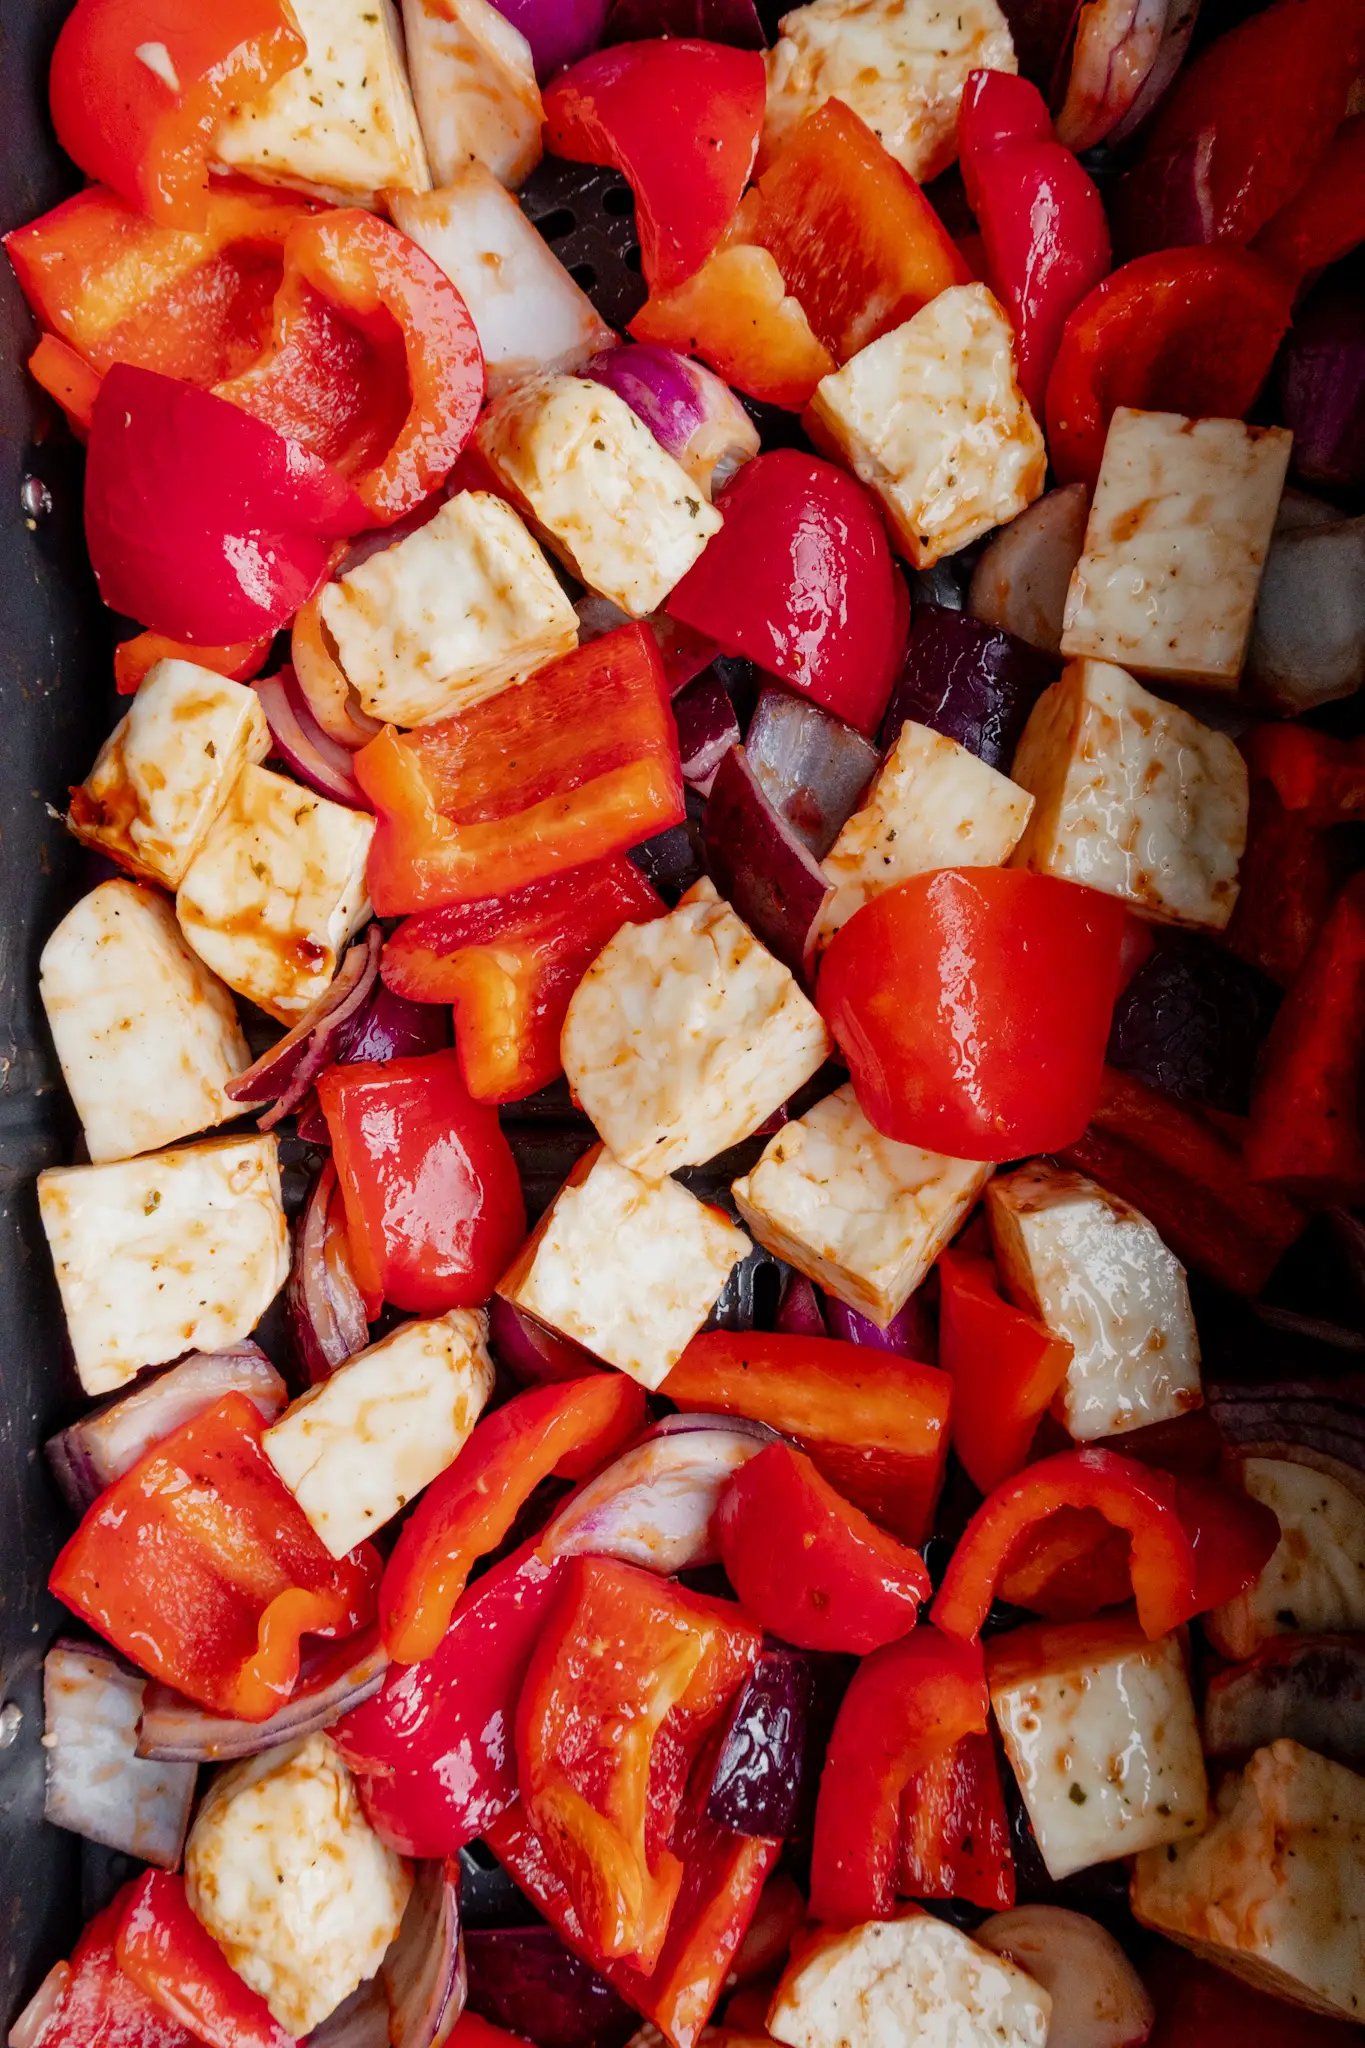 Halloumi, bell peppers and red onion